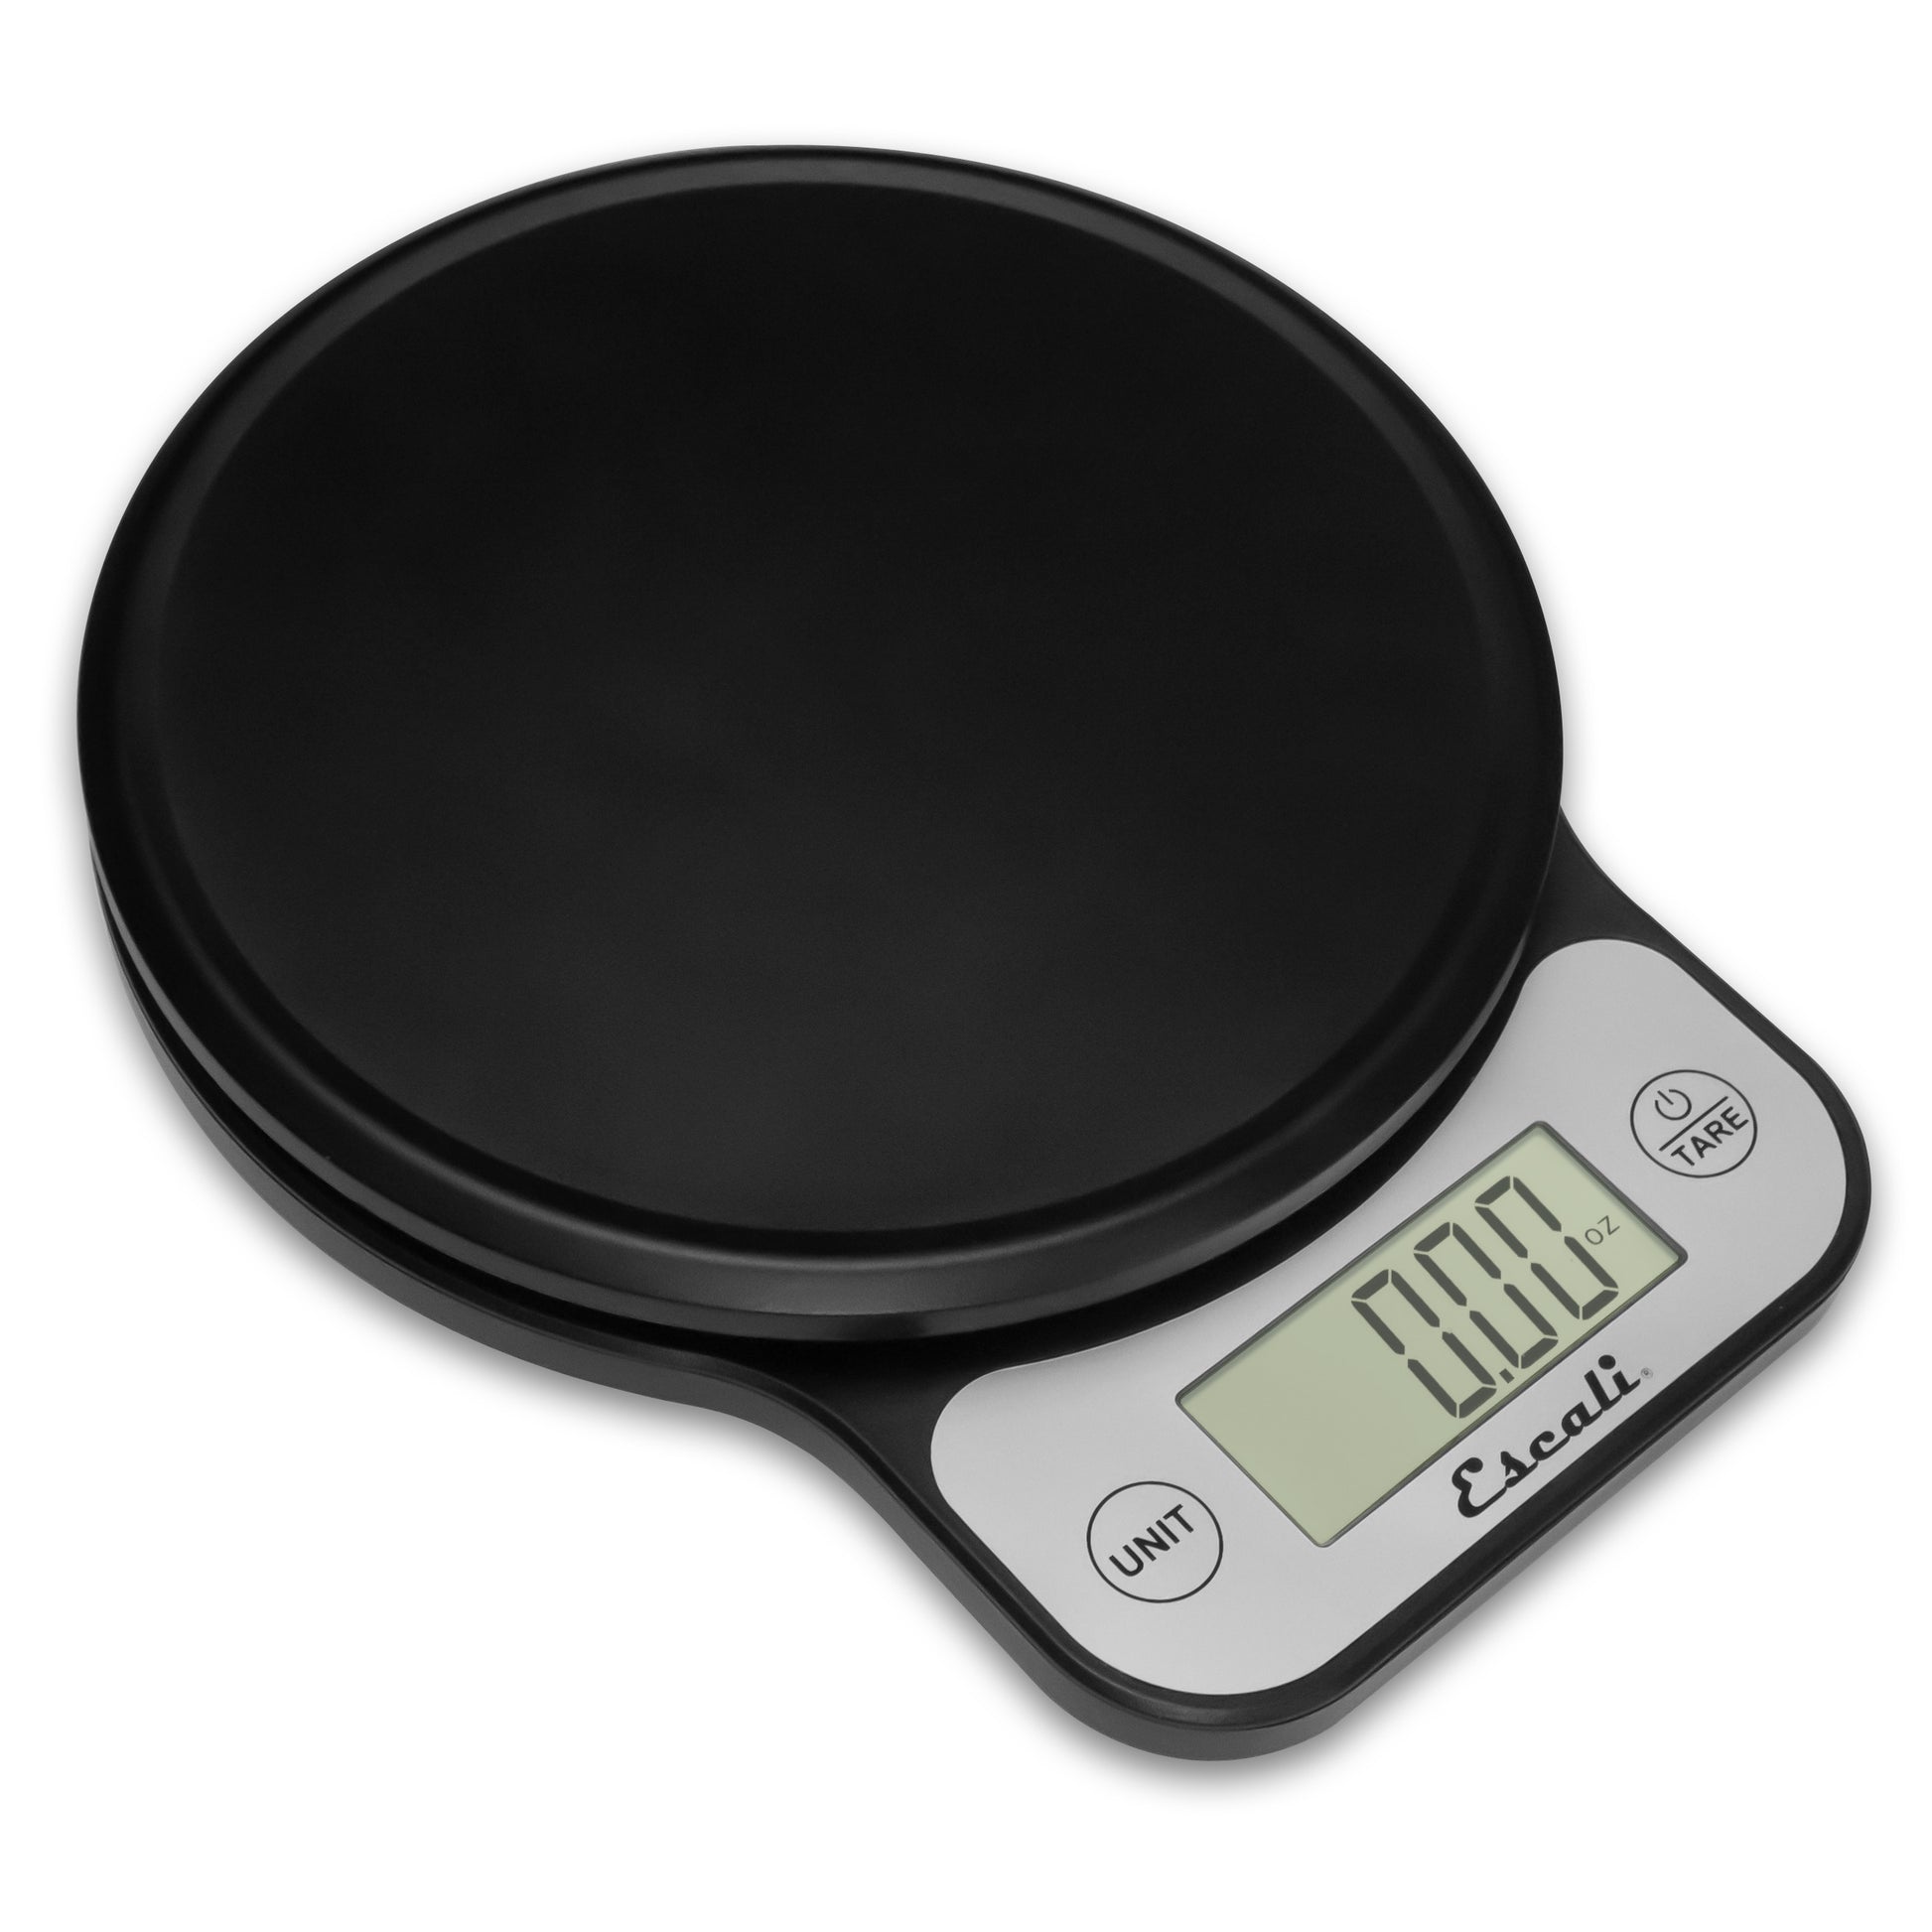 An angled photo of a black Telero Digital Kitchen Scale on a white background.